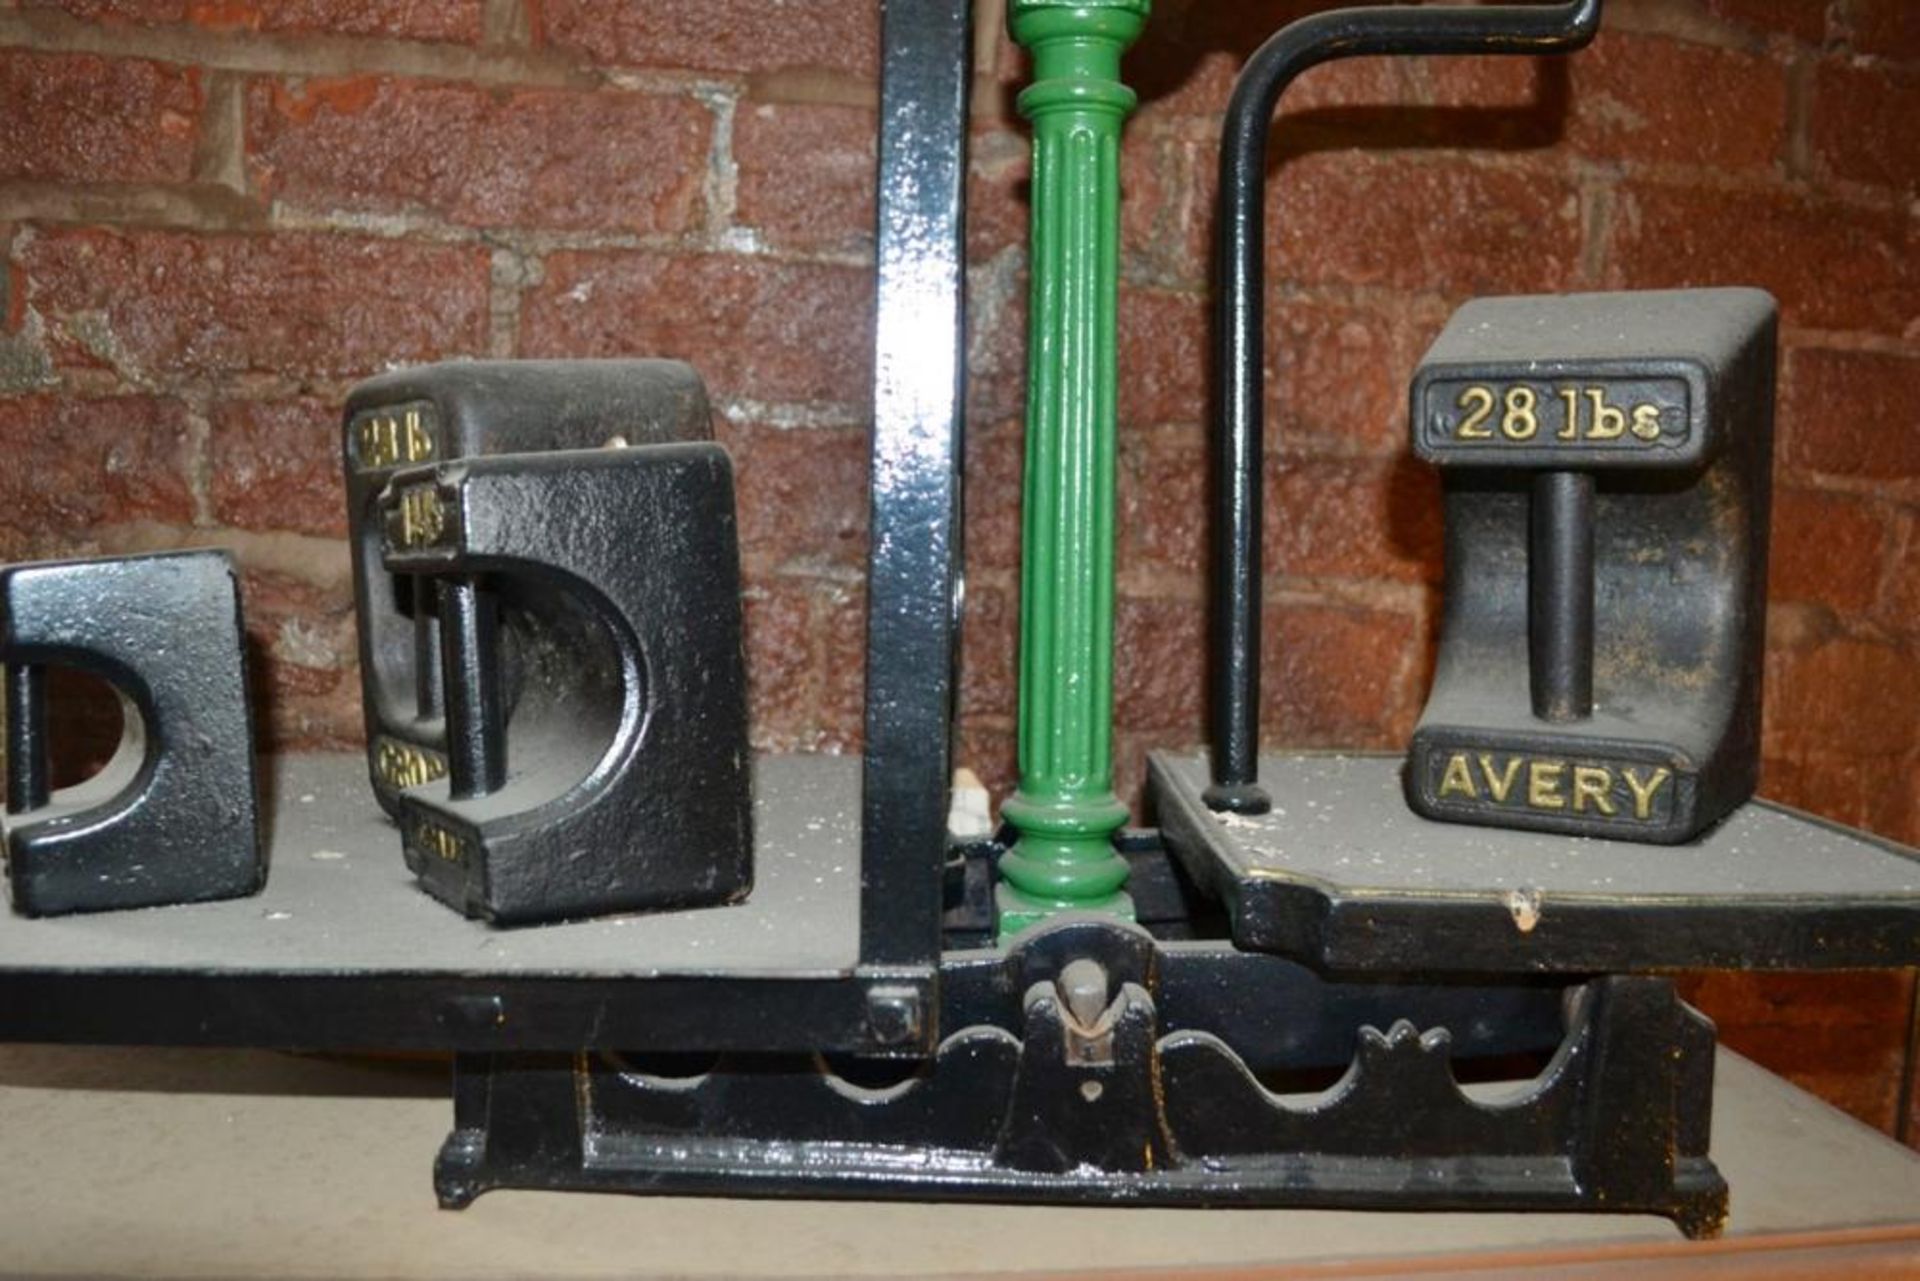 1 x Set of Vintage Avery Weighing Scales With Various Large Weights - H54 x W70 x D44 cms - Ref BB58 - Image 2 of 7